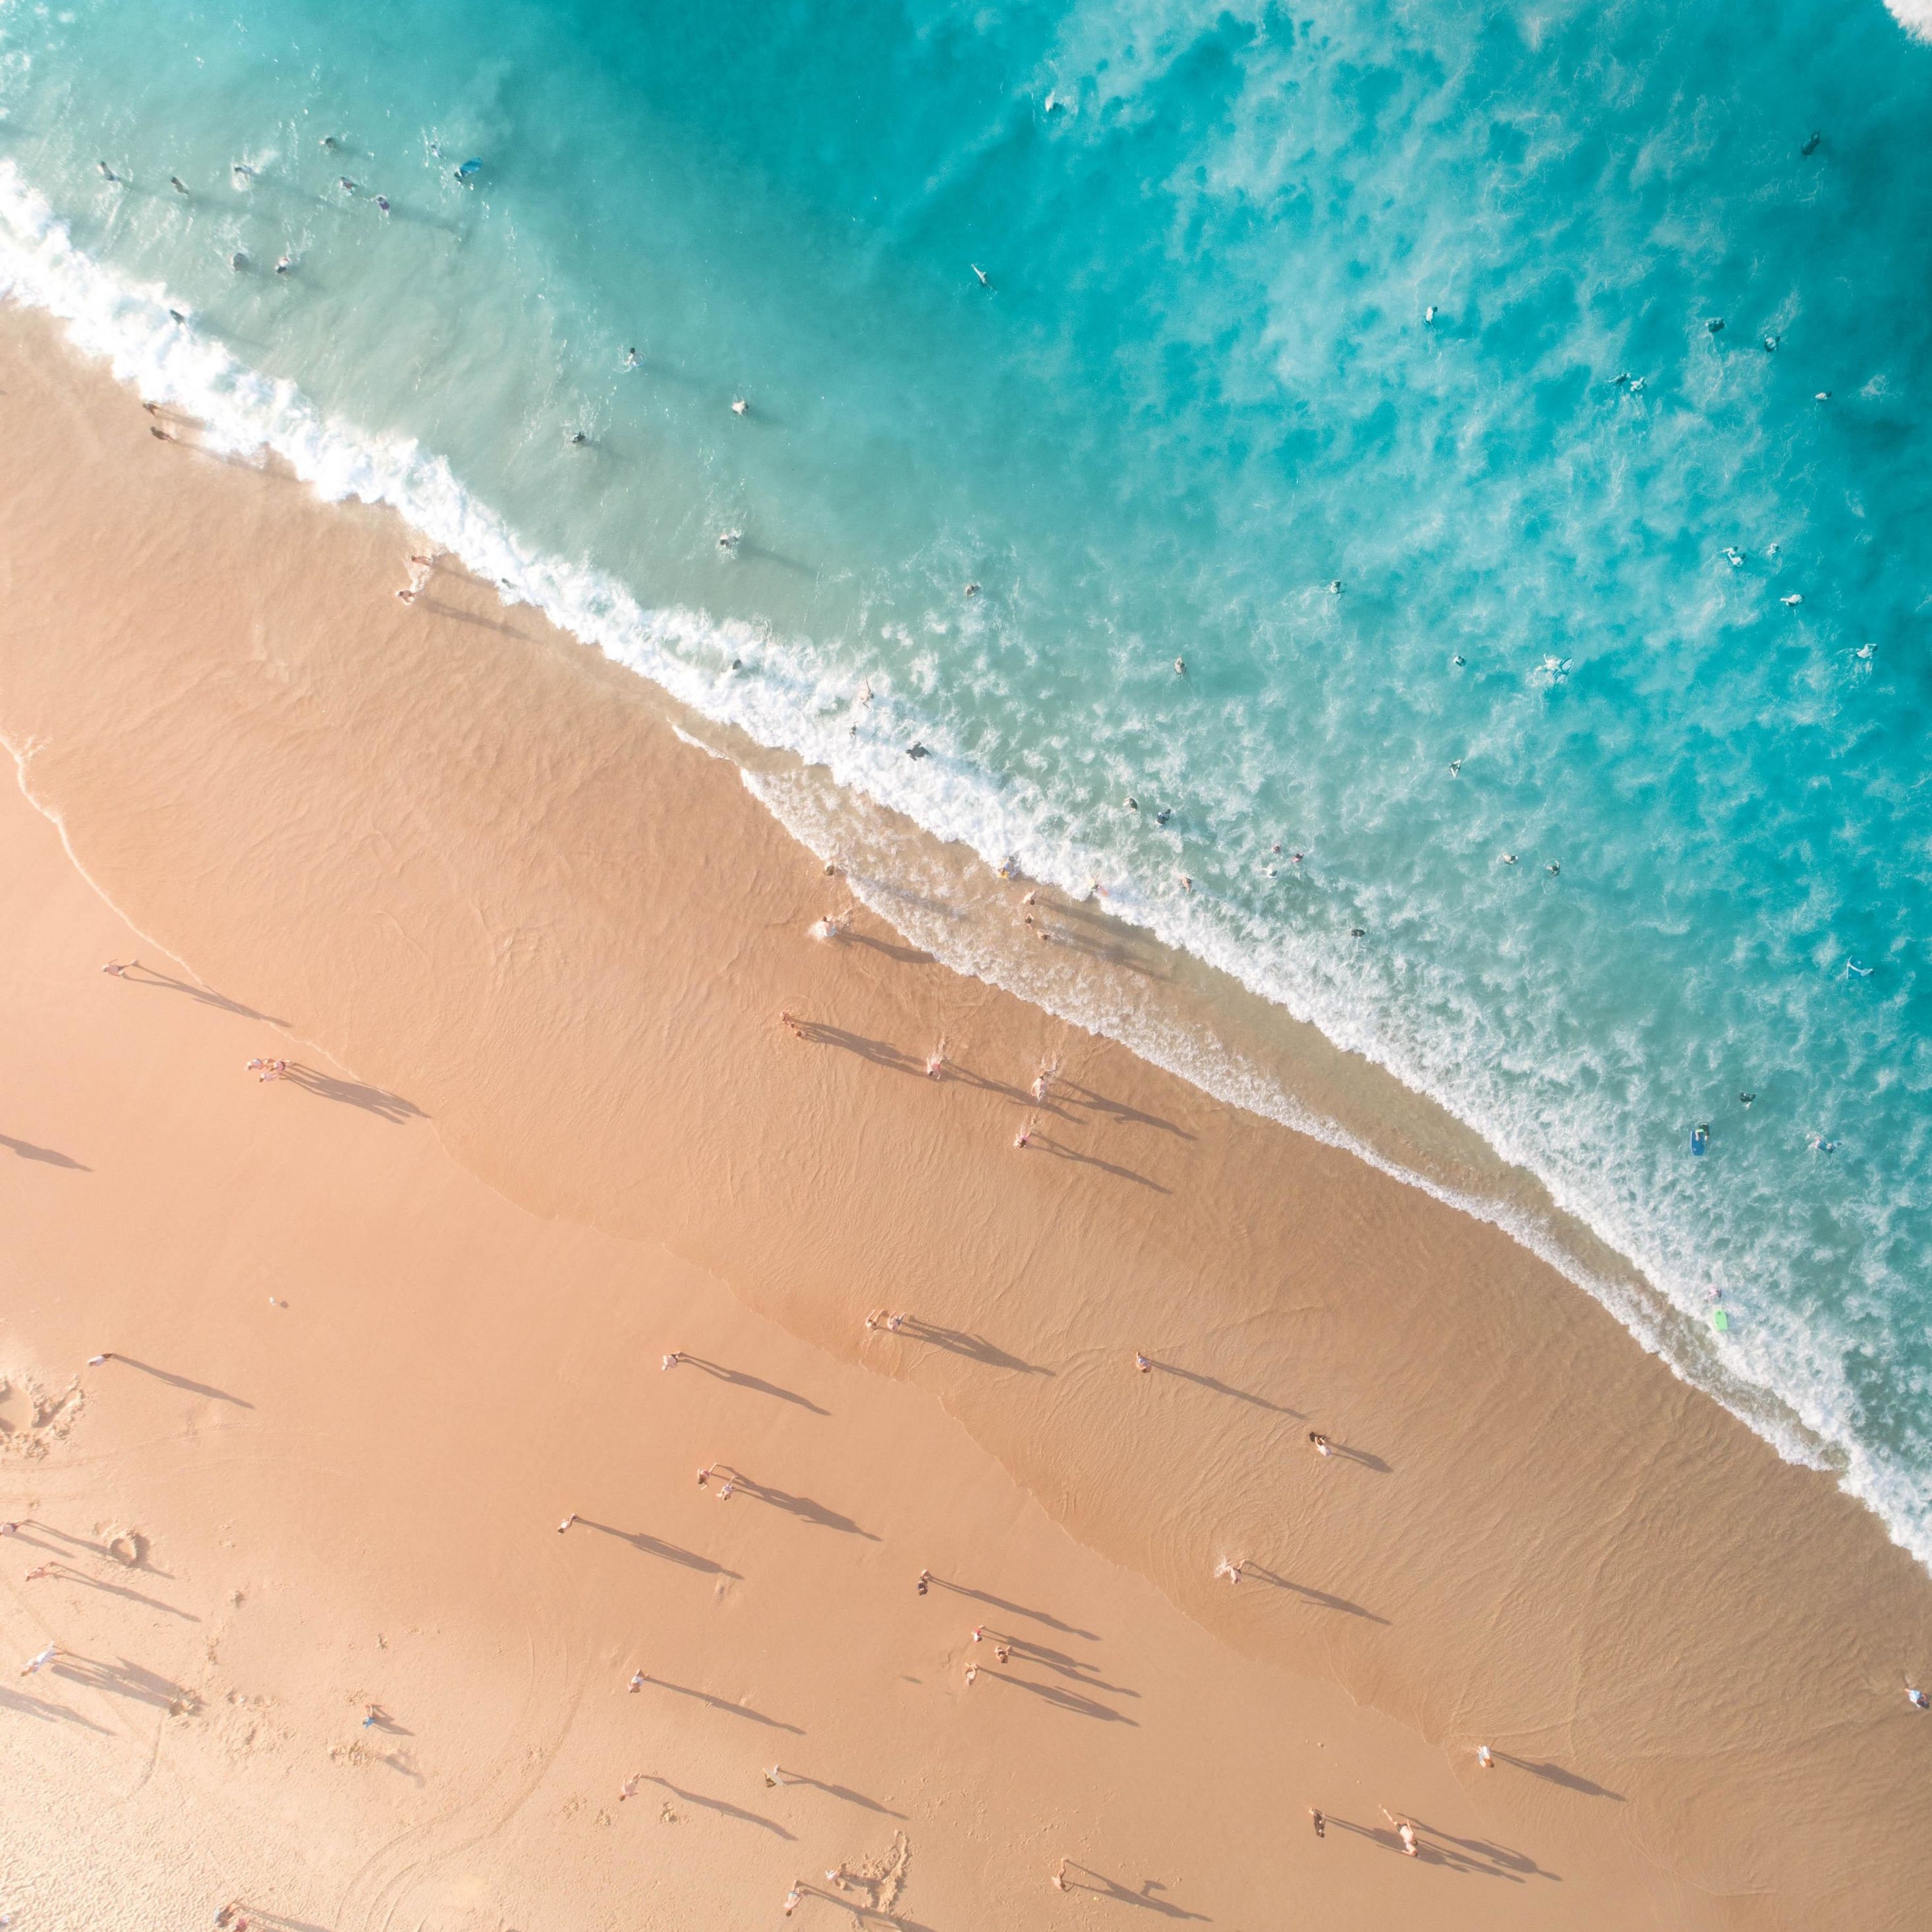 Download 2932x2932 wallpaper aerial view, calm and peaceful beach